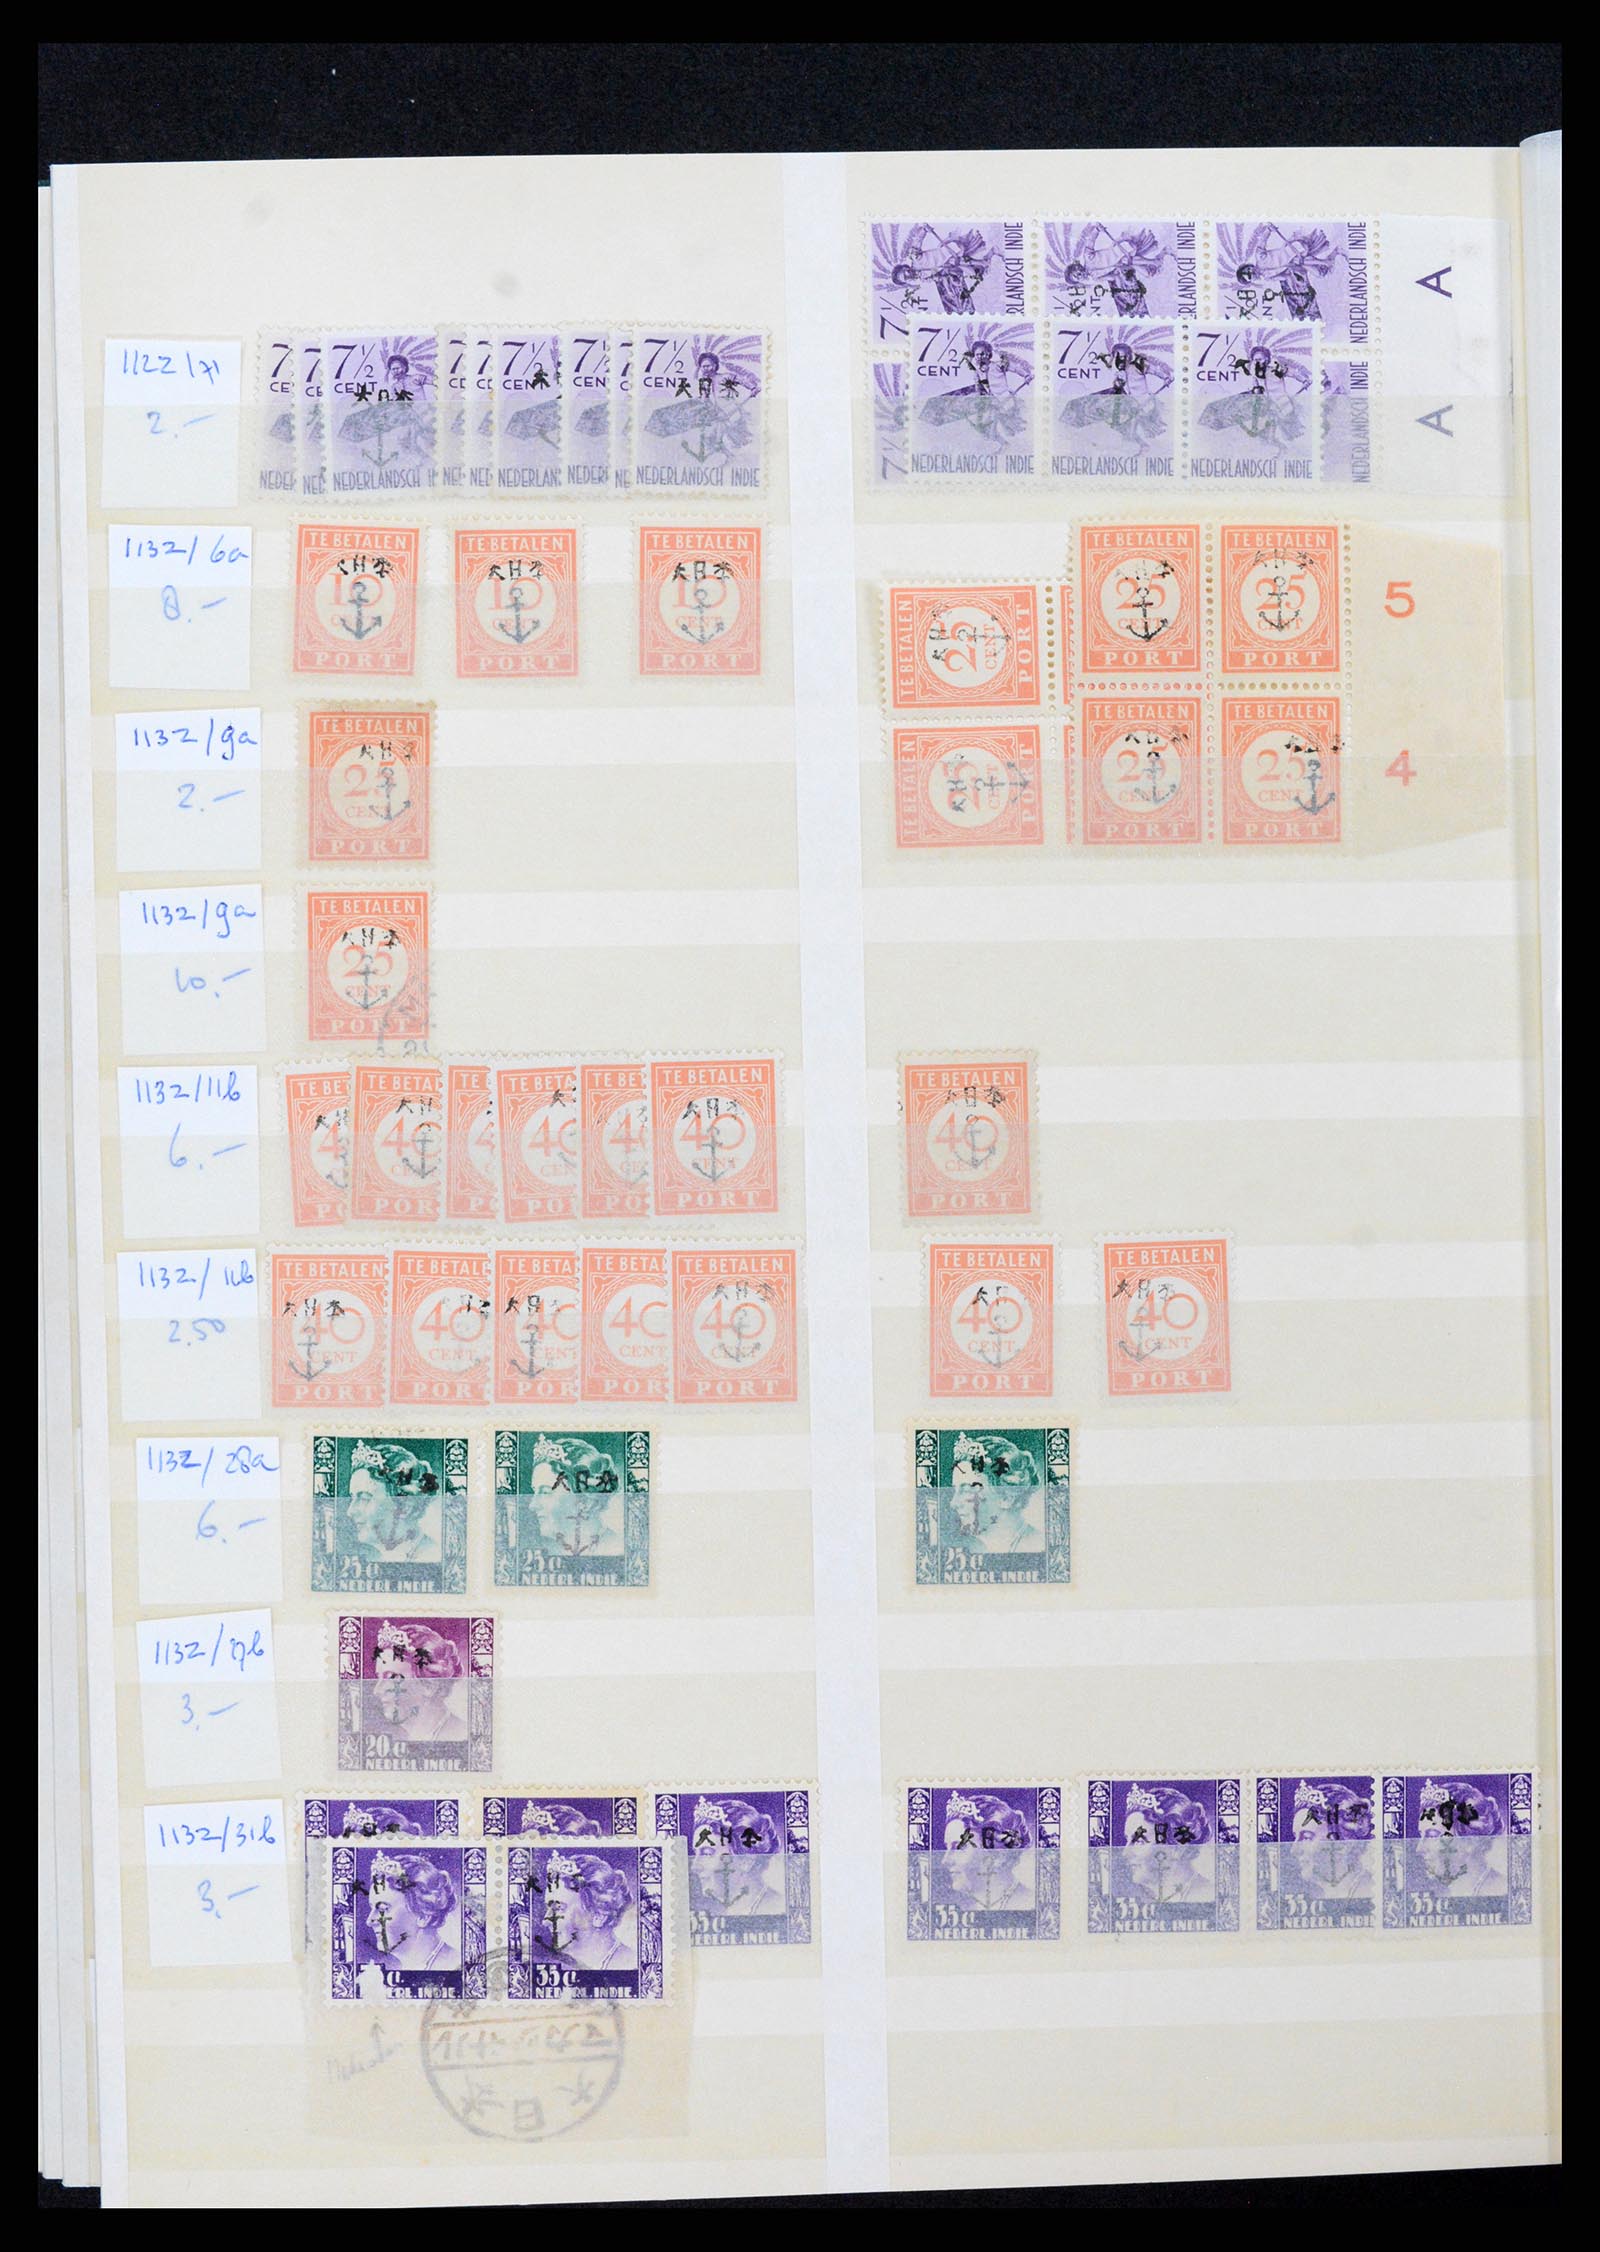 37429 020 - Stamp collection 37429 Japanese occupation Dutch East Indies 1942-1945.